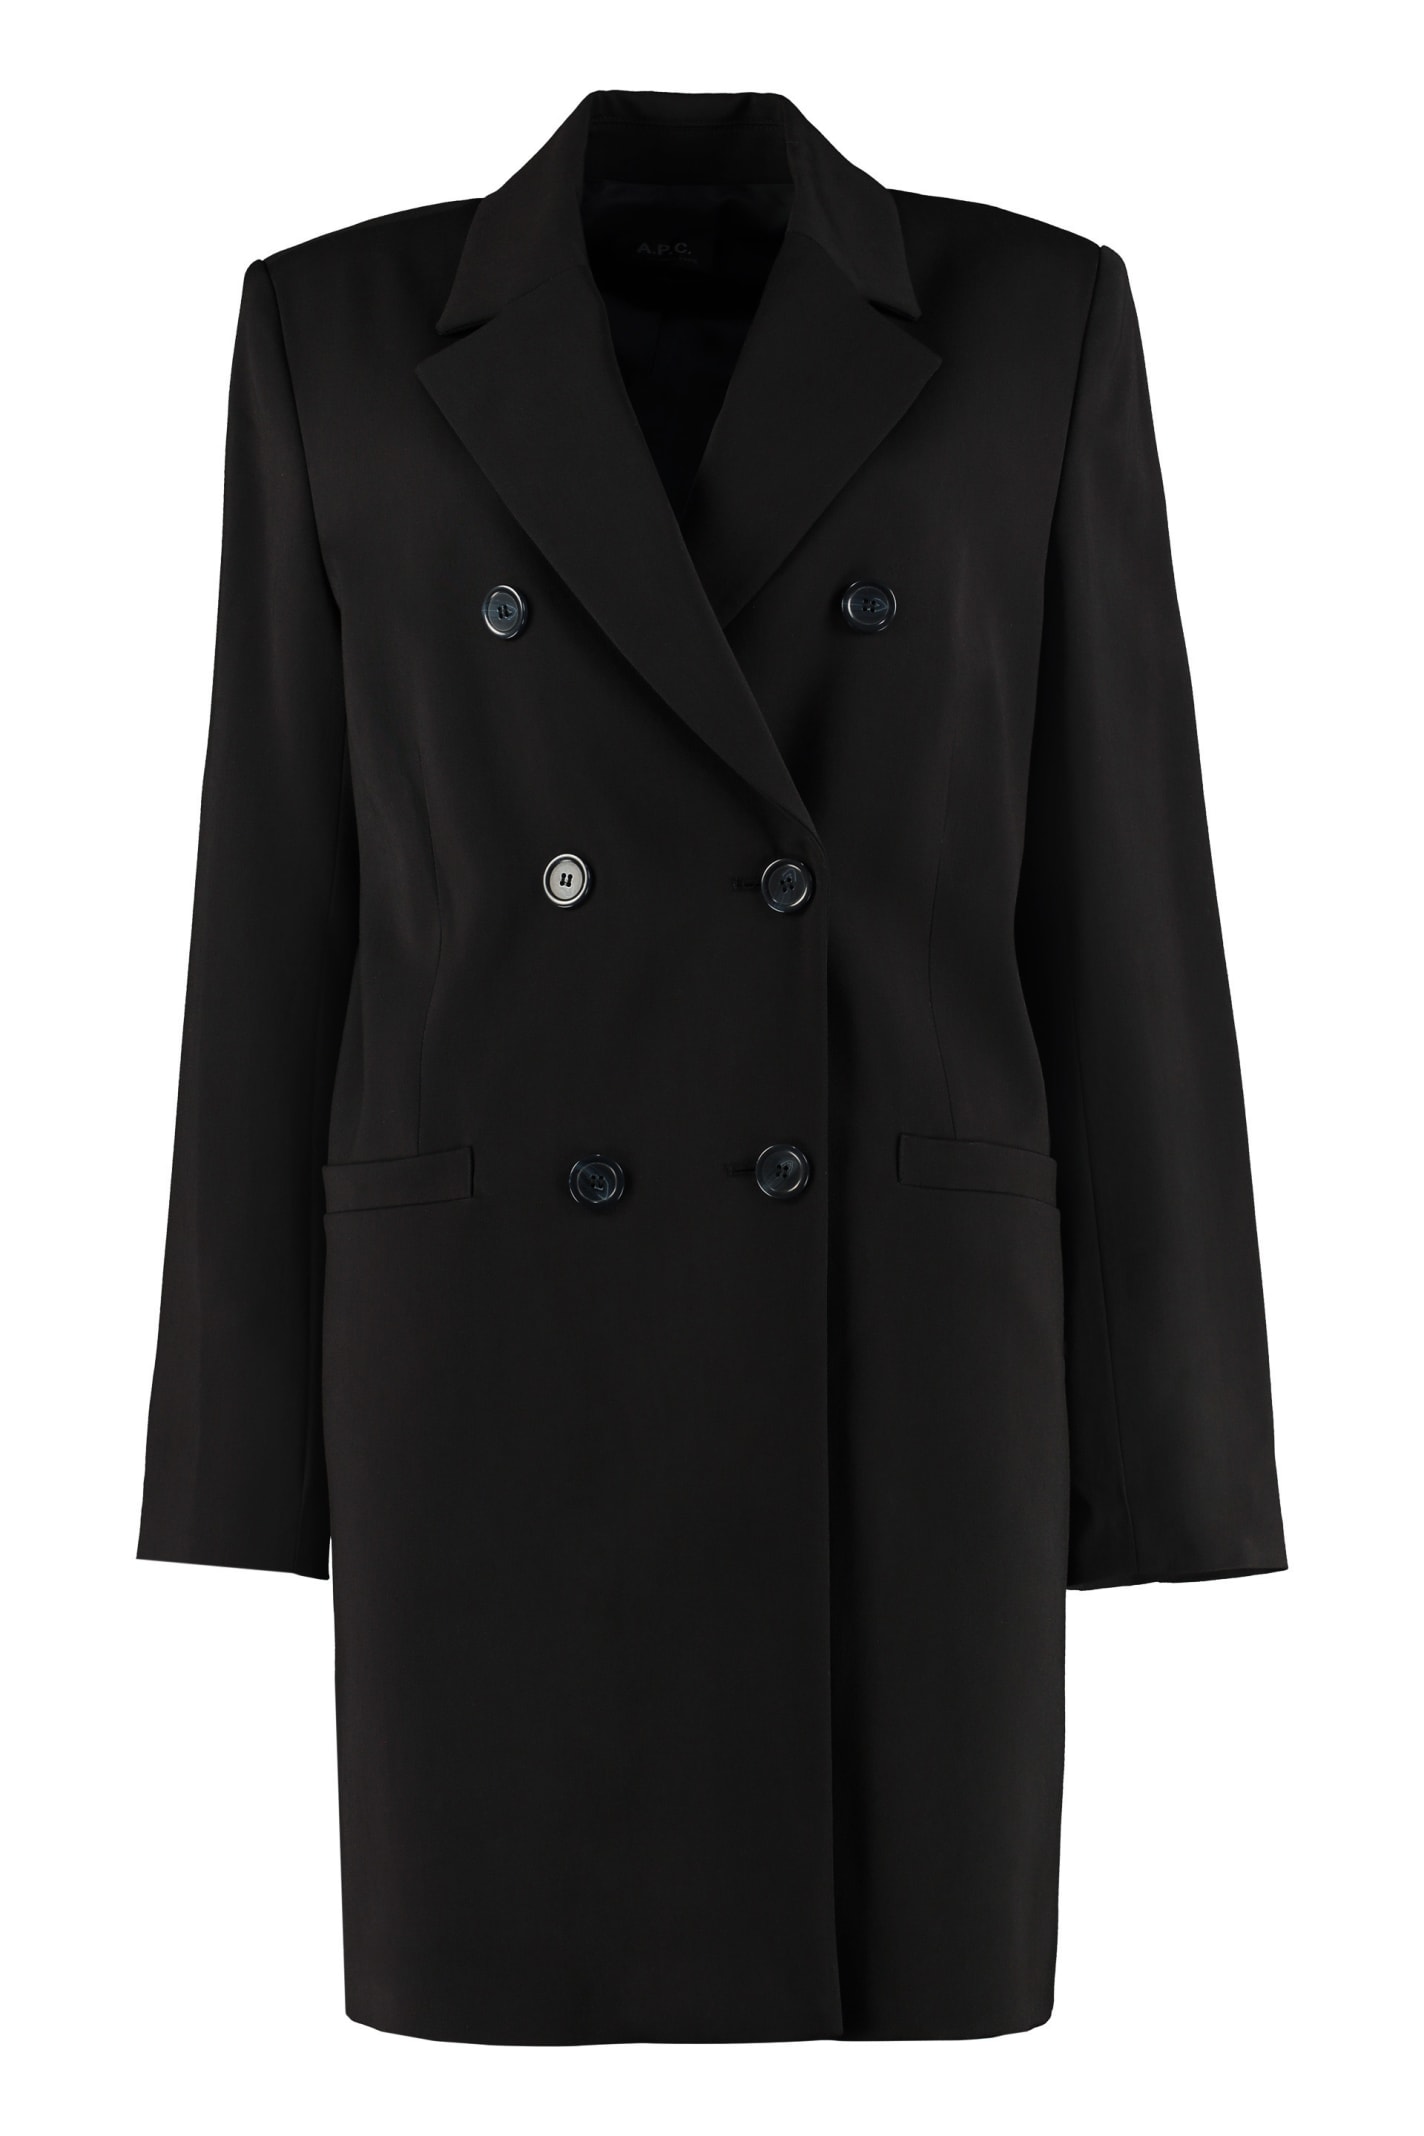 A.P.C. Colette Double-breasted Coat